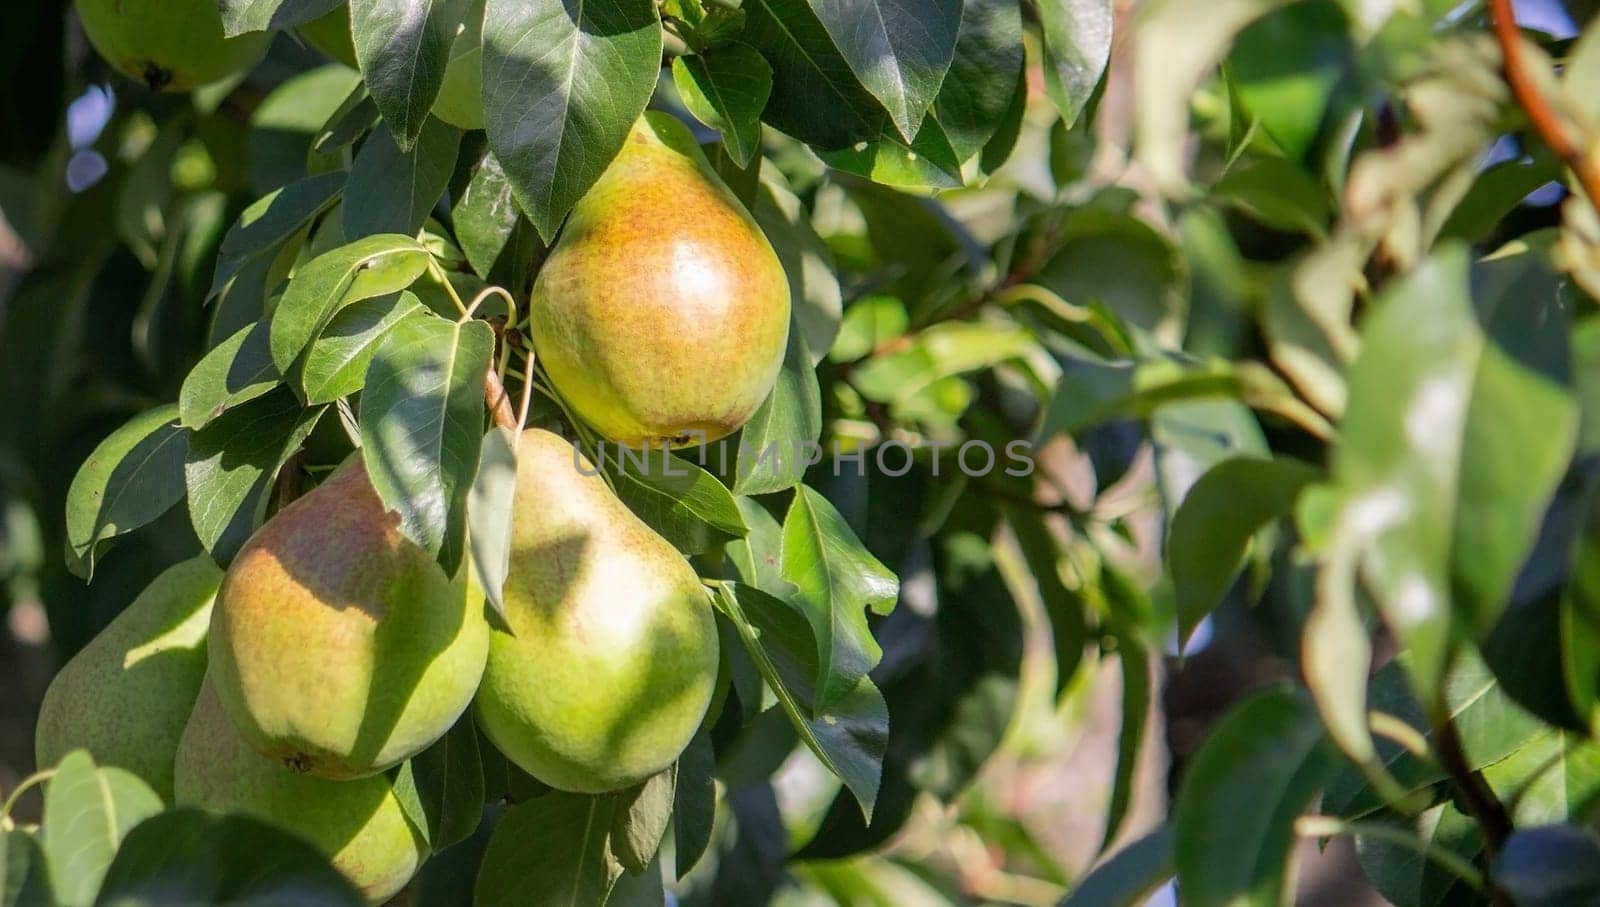 Branch of ripe organic cultivar of pears close-up in the summer garden.